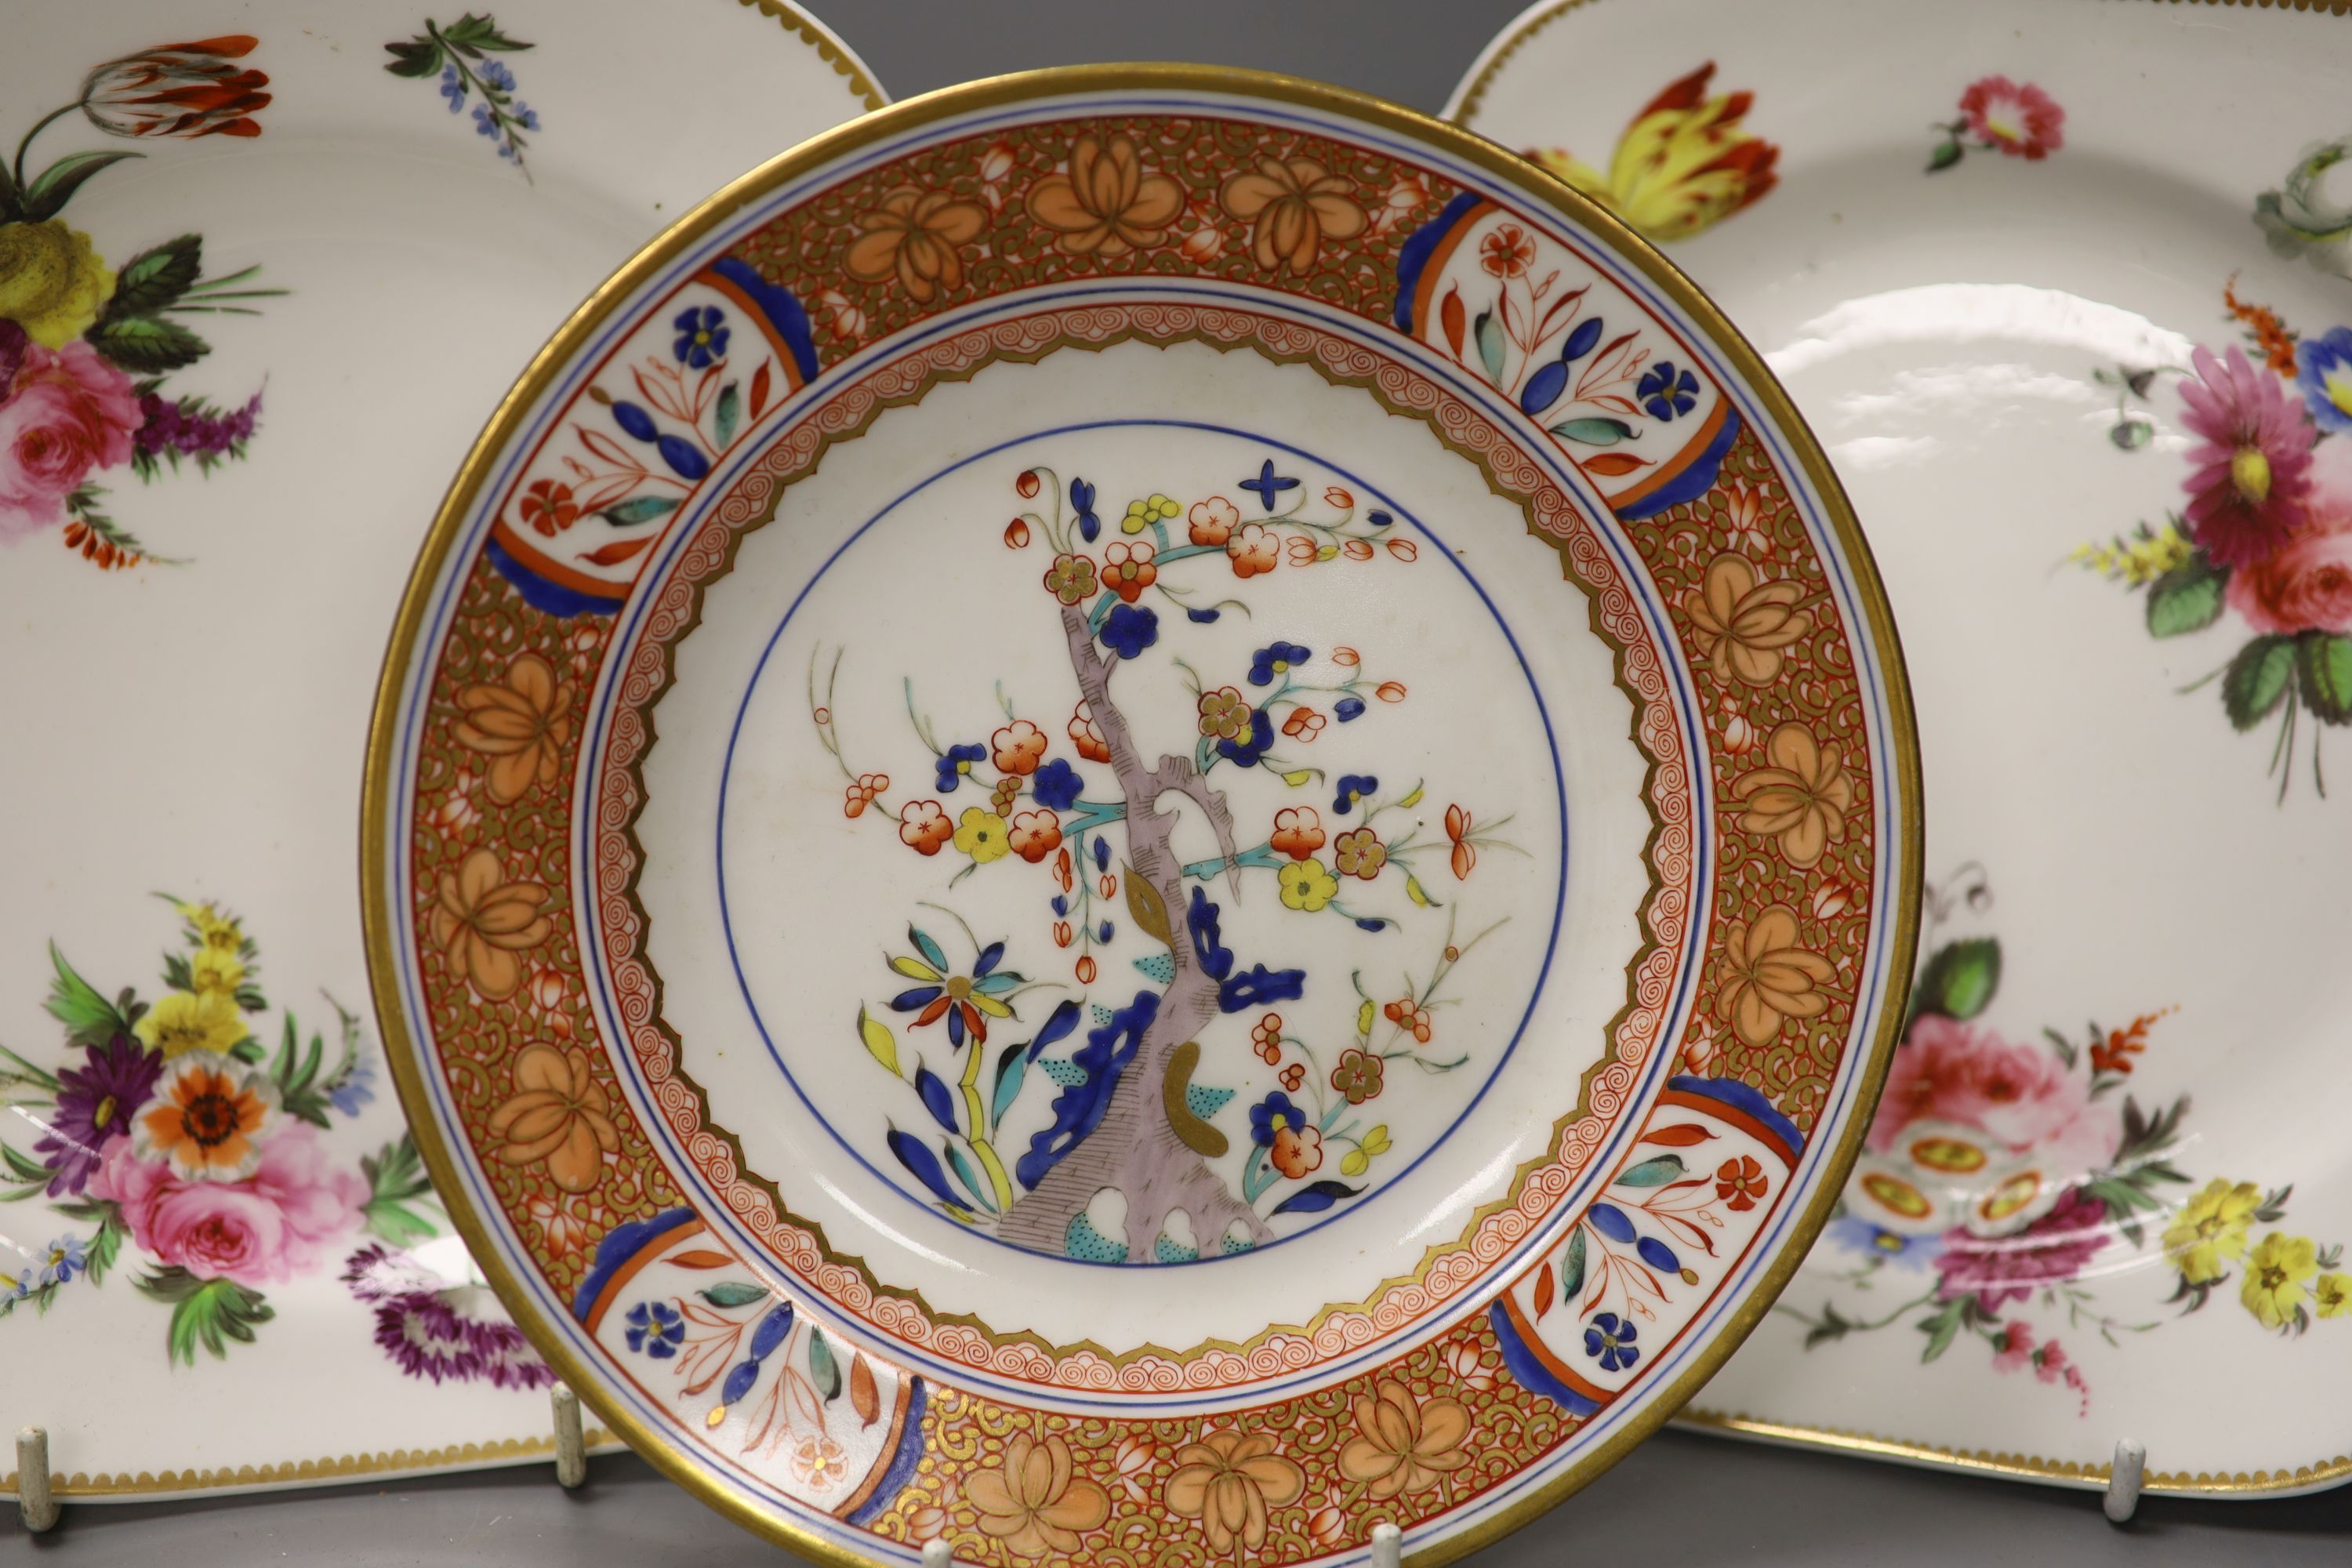 A set of three Spode square dishes each painted with three floral bouquets and three sprigs,